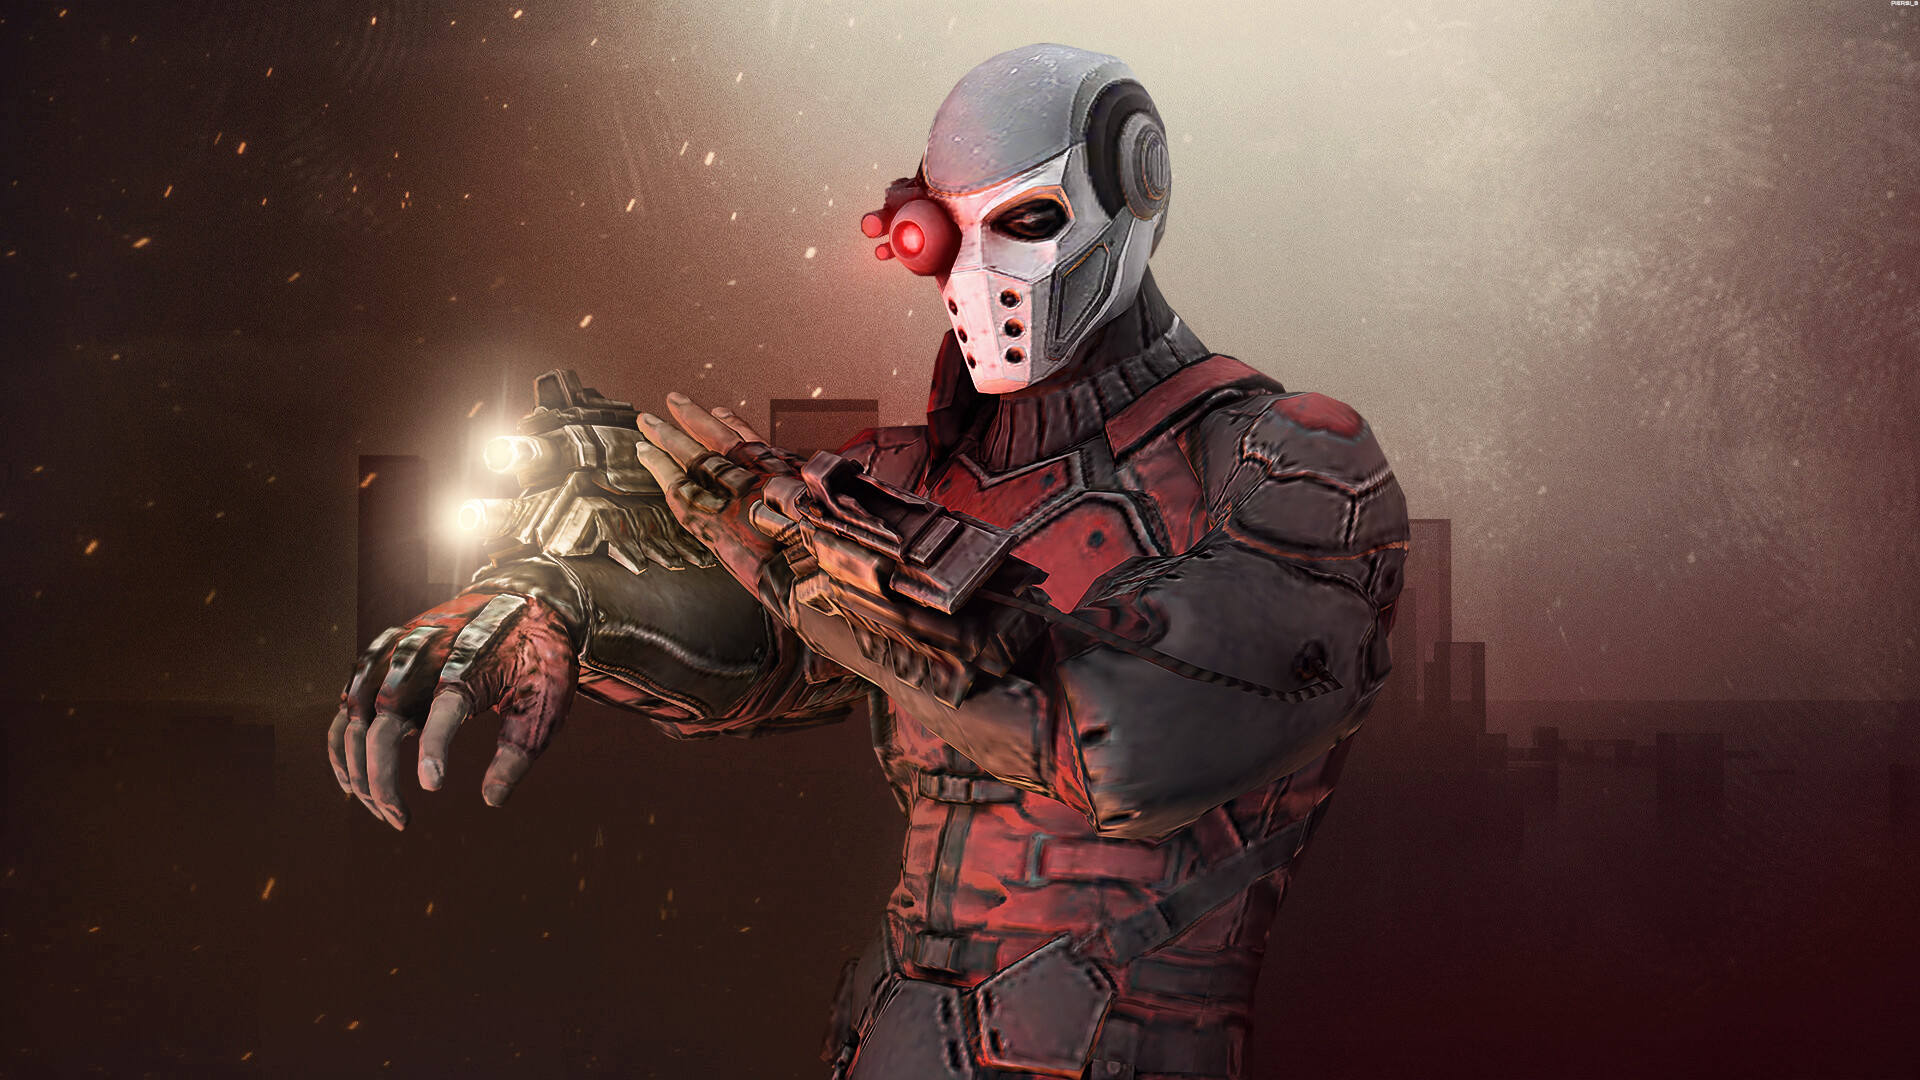 1080x1920  1080x1920 deadshot hd superheroes artwork for Iphone 6 7 8  wallpaper  Coolwallpapersme